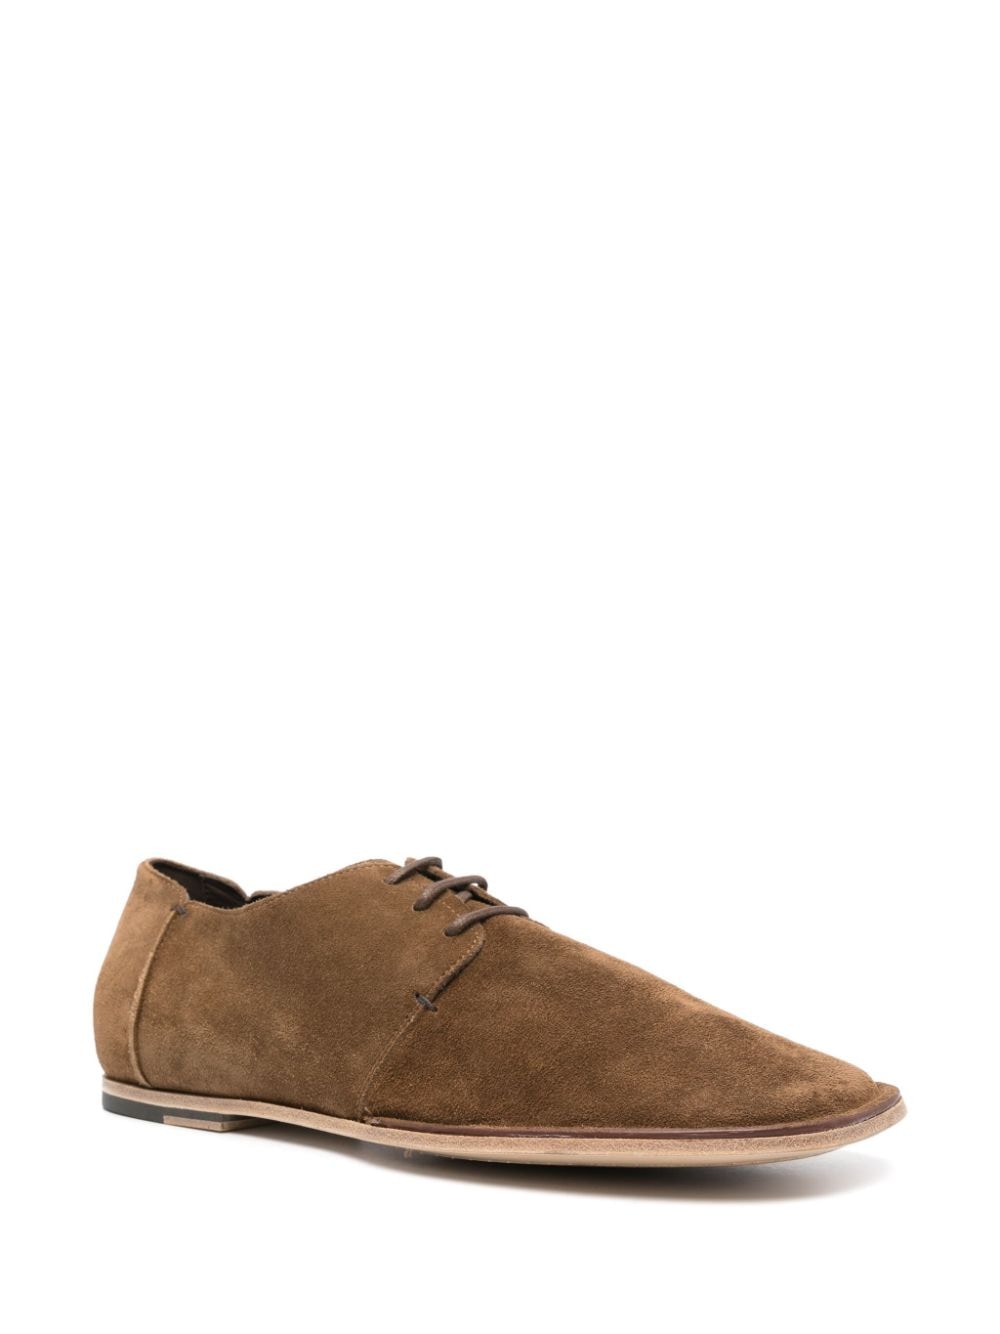 Vic Matie suede oxford shoes - Bruin